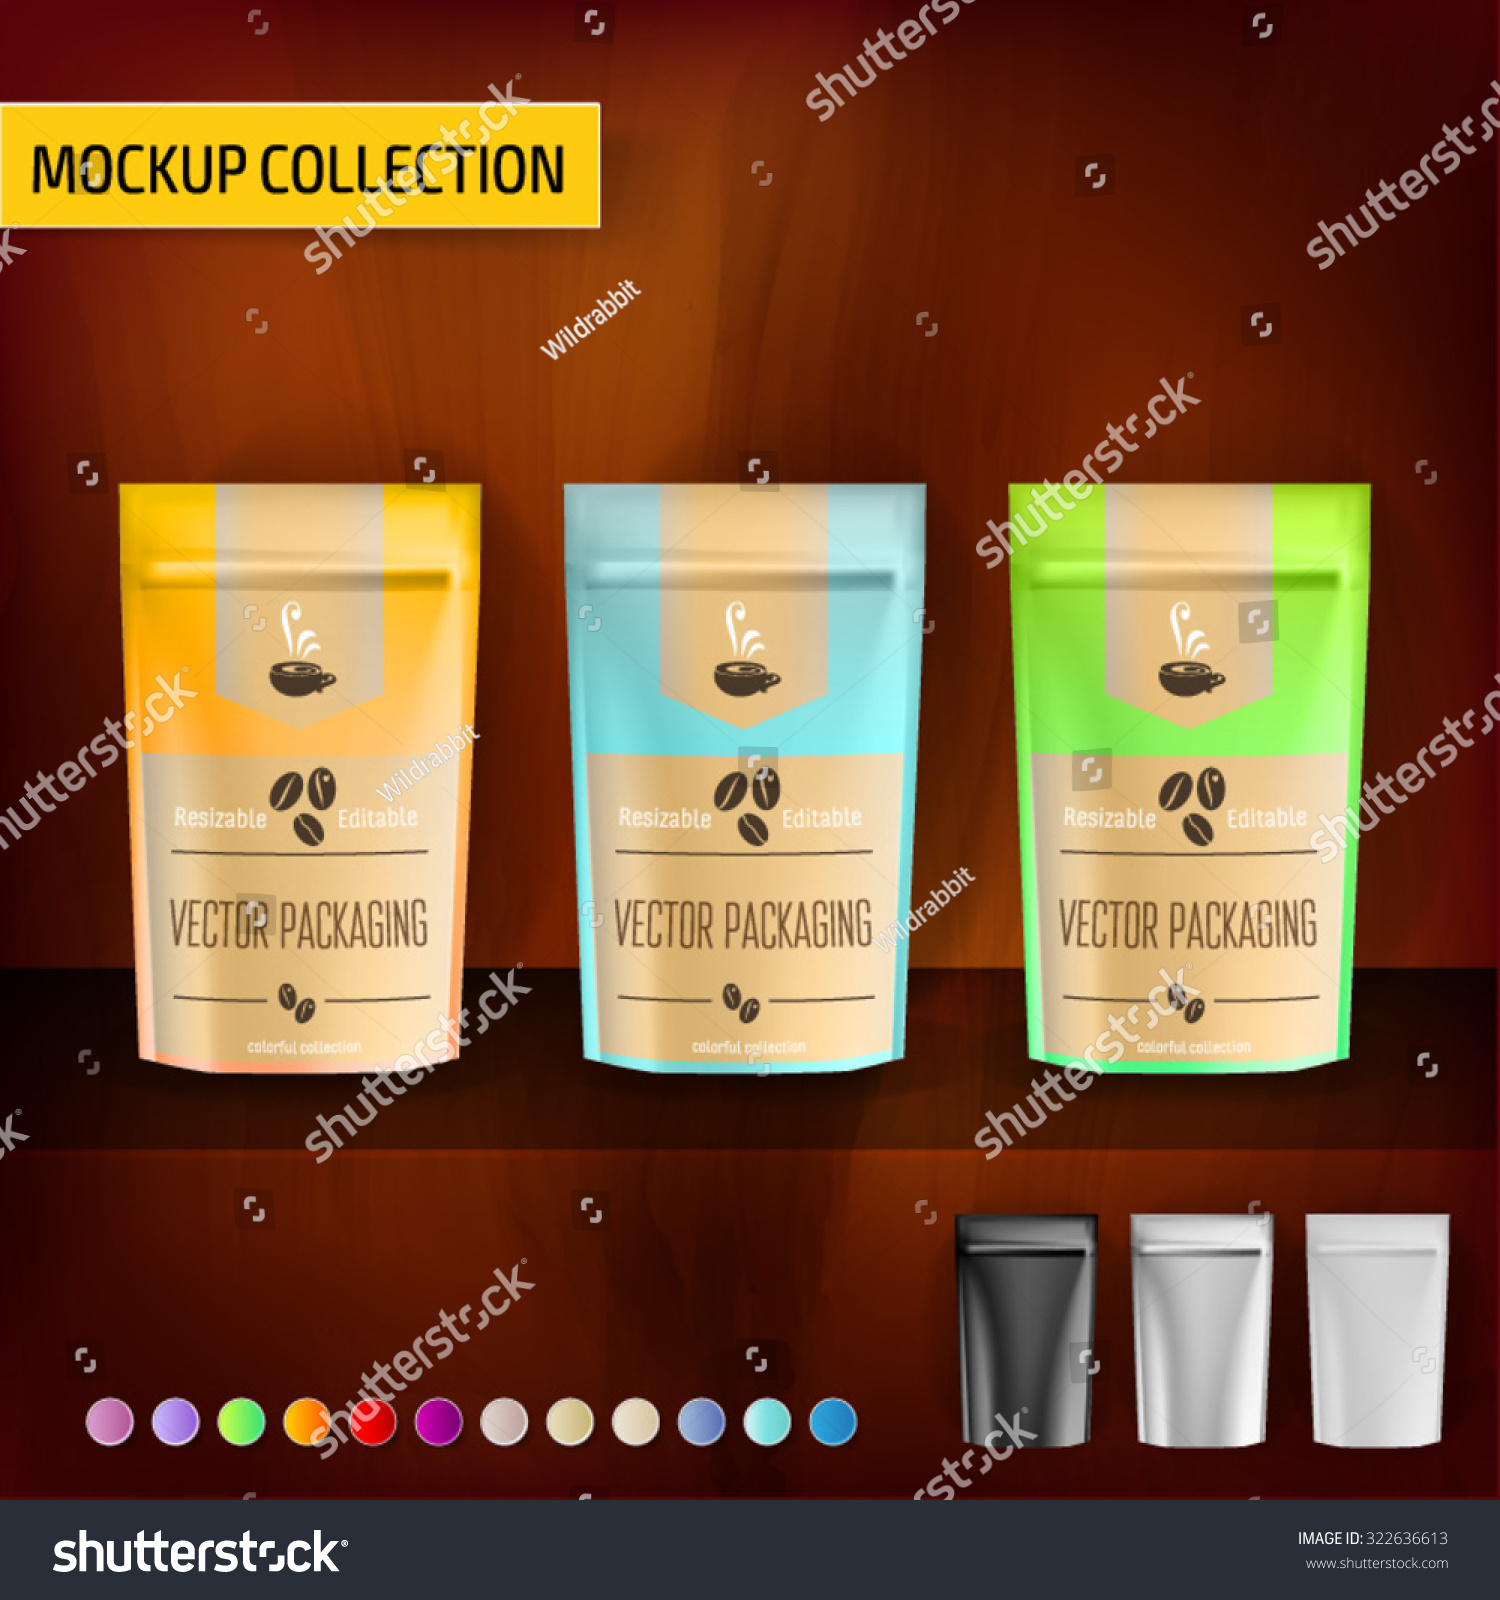 Download Mockup Template Flow Pack Branding Product Stock Vector (Royalty Free) 322636613 - Shutterstock